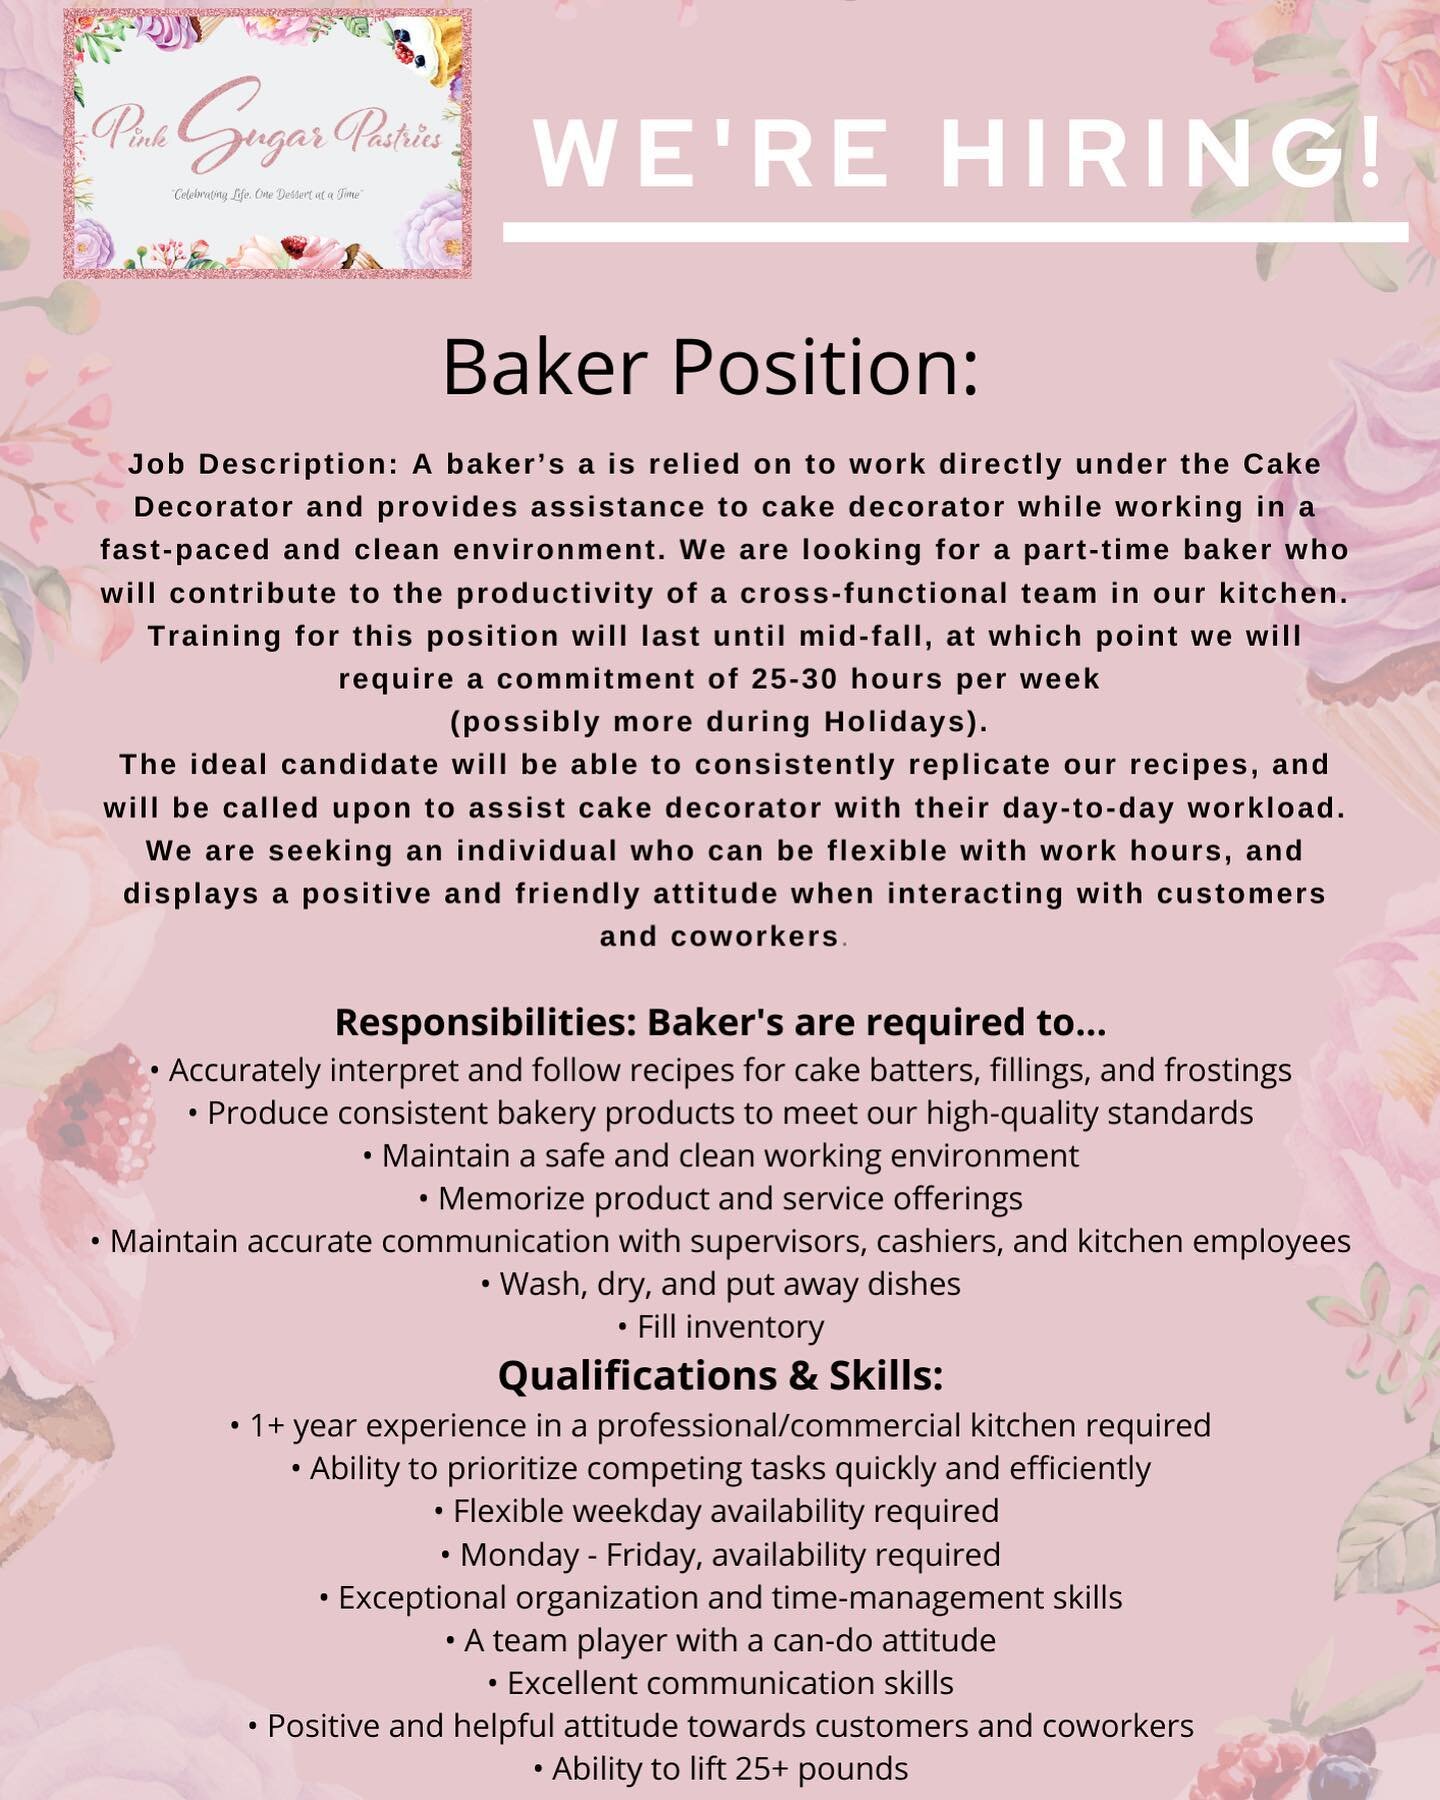 We&rsquo;re so excited to announce that we are hiring someone with a passion for baking🎉 Send us your resume to PinkSugarPastries@gmail.com or come into the store ❤️ We have two positions available AM 9-2pm&hellip; PM 3-7pm 
PLEASE READ ALL QUALIFIC